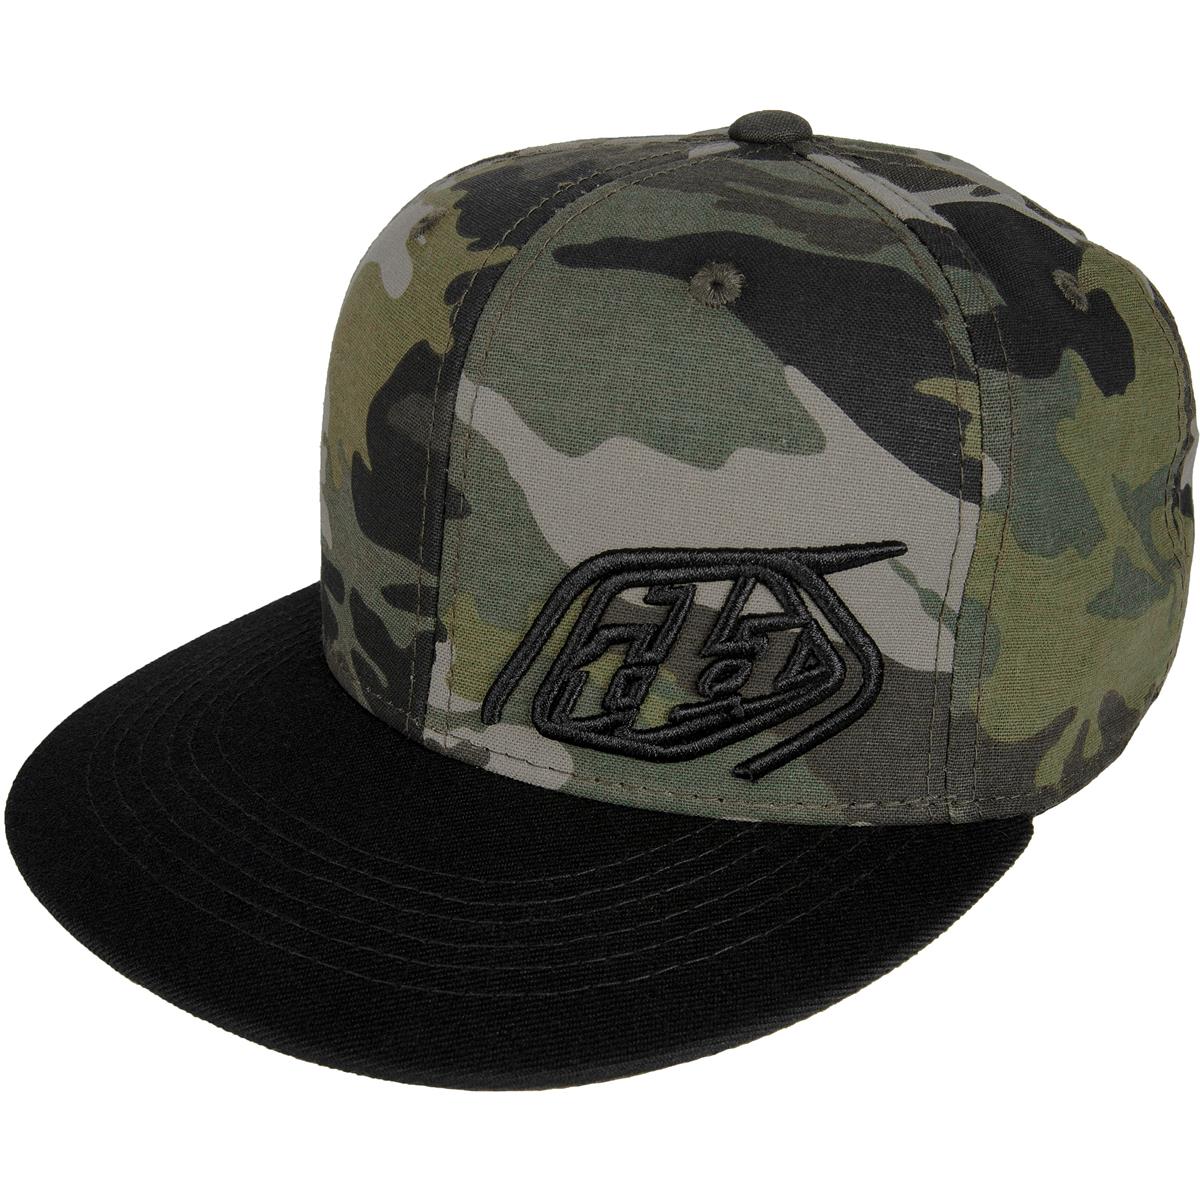 Troy Lee Designs 9Fifty Casquette Snap Back Slice Camo Army Green/Black